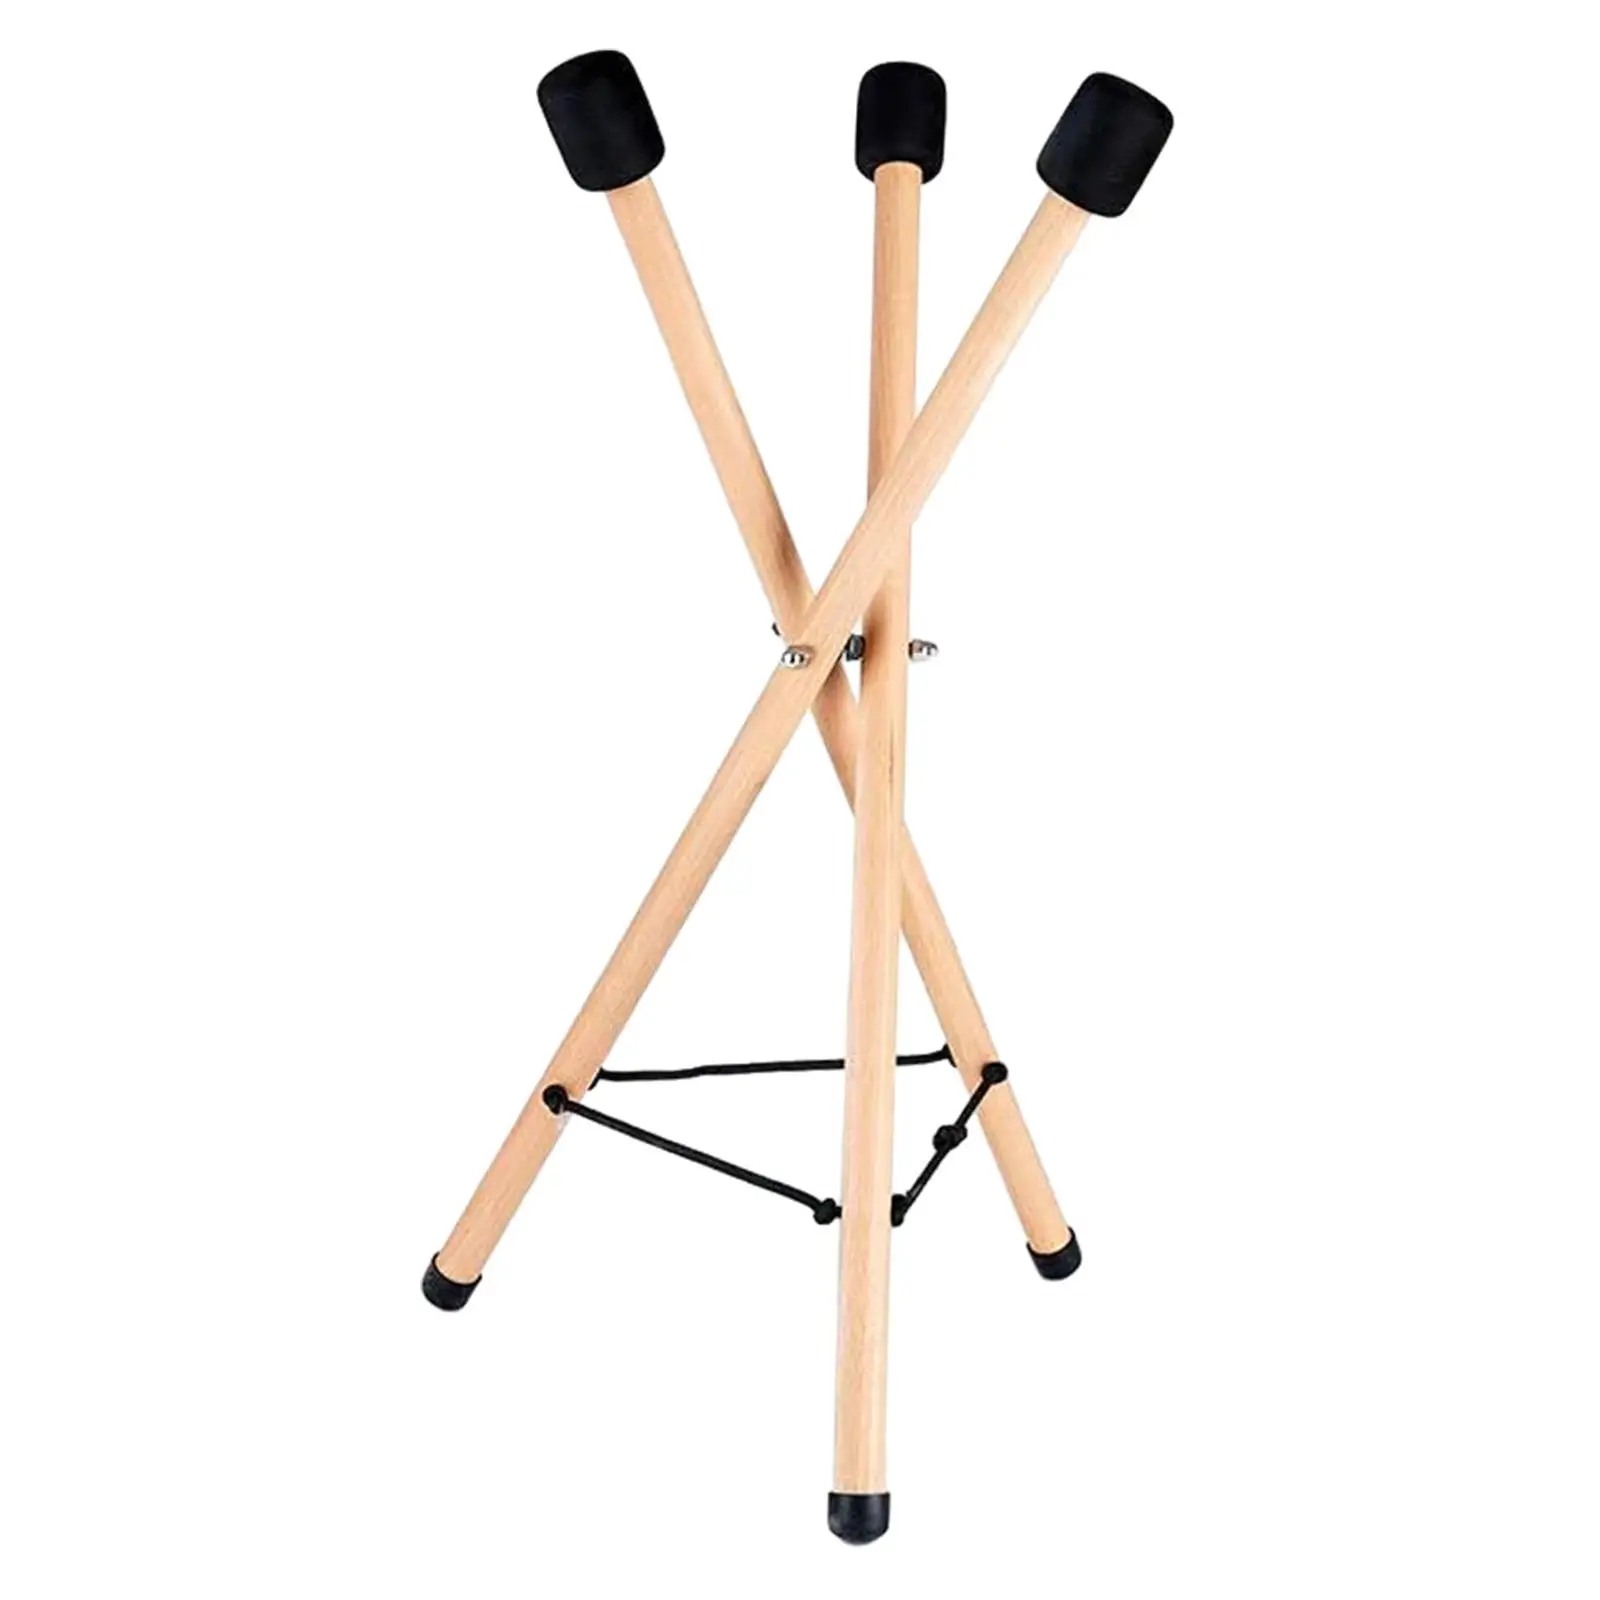 Snare Drum Stand Top Rubber Pad Adjustable Solid Wood Extendable 93cm Height for Yoga Stage Performances Camping Parties Picnics